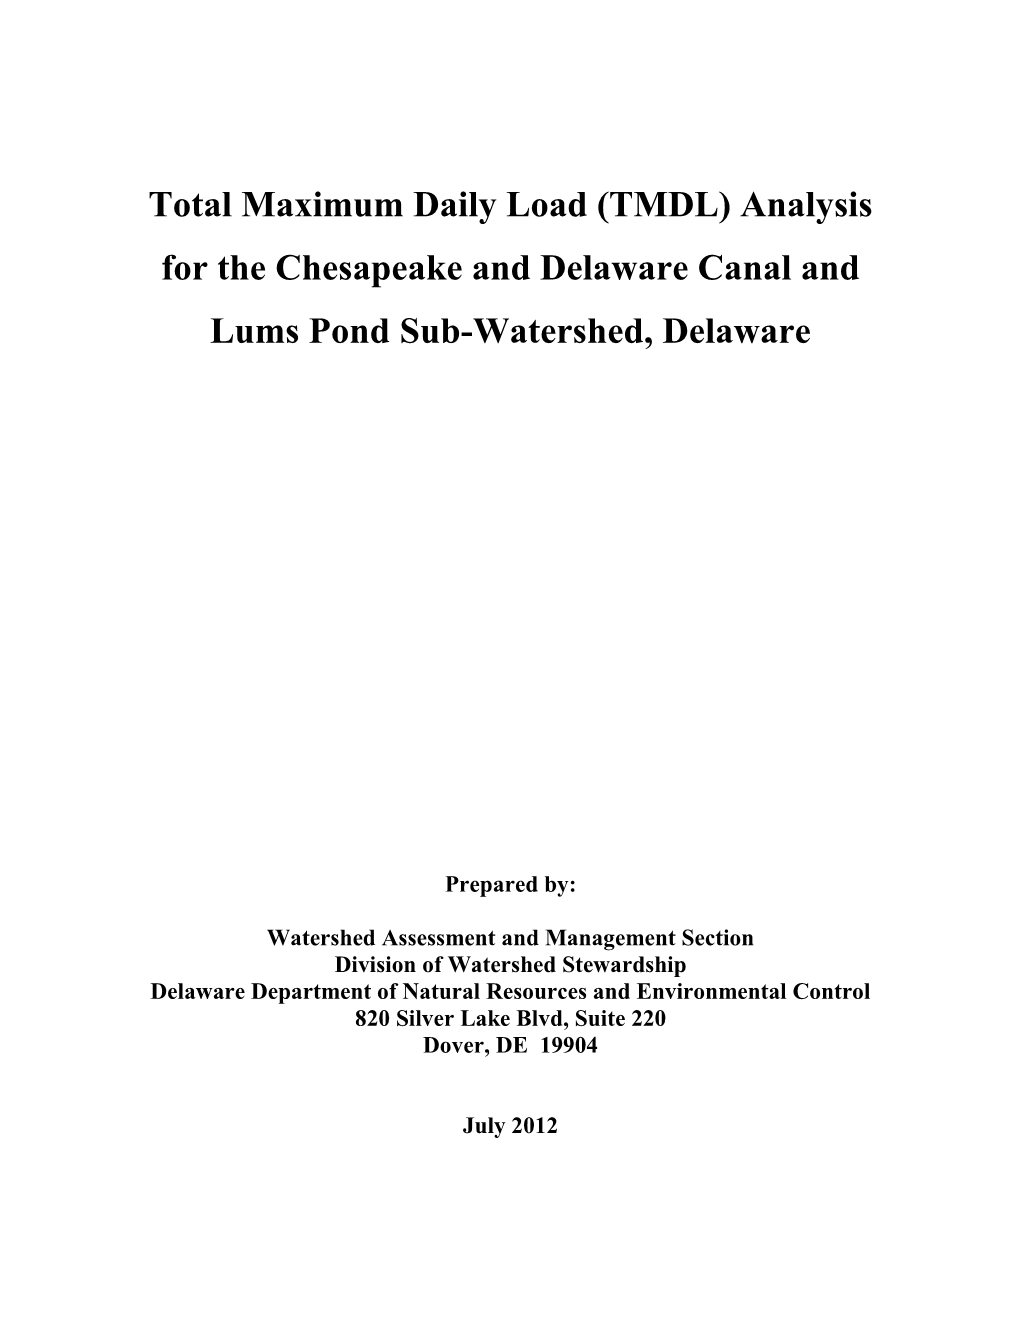 Analysis for the Chesapeake and Delaware Canal and Lums Pond Sub-Watershed, Delaware